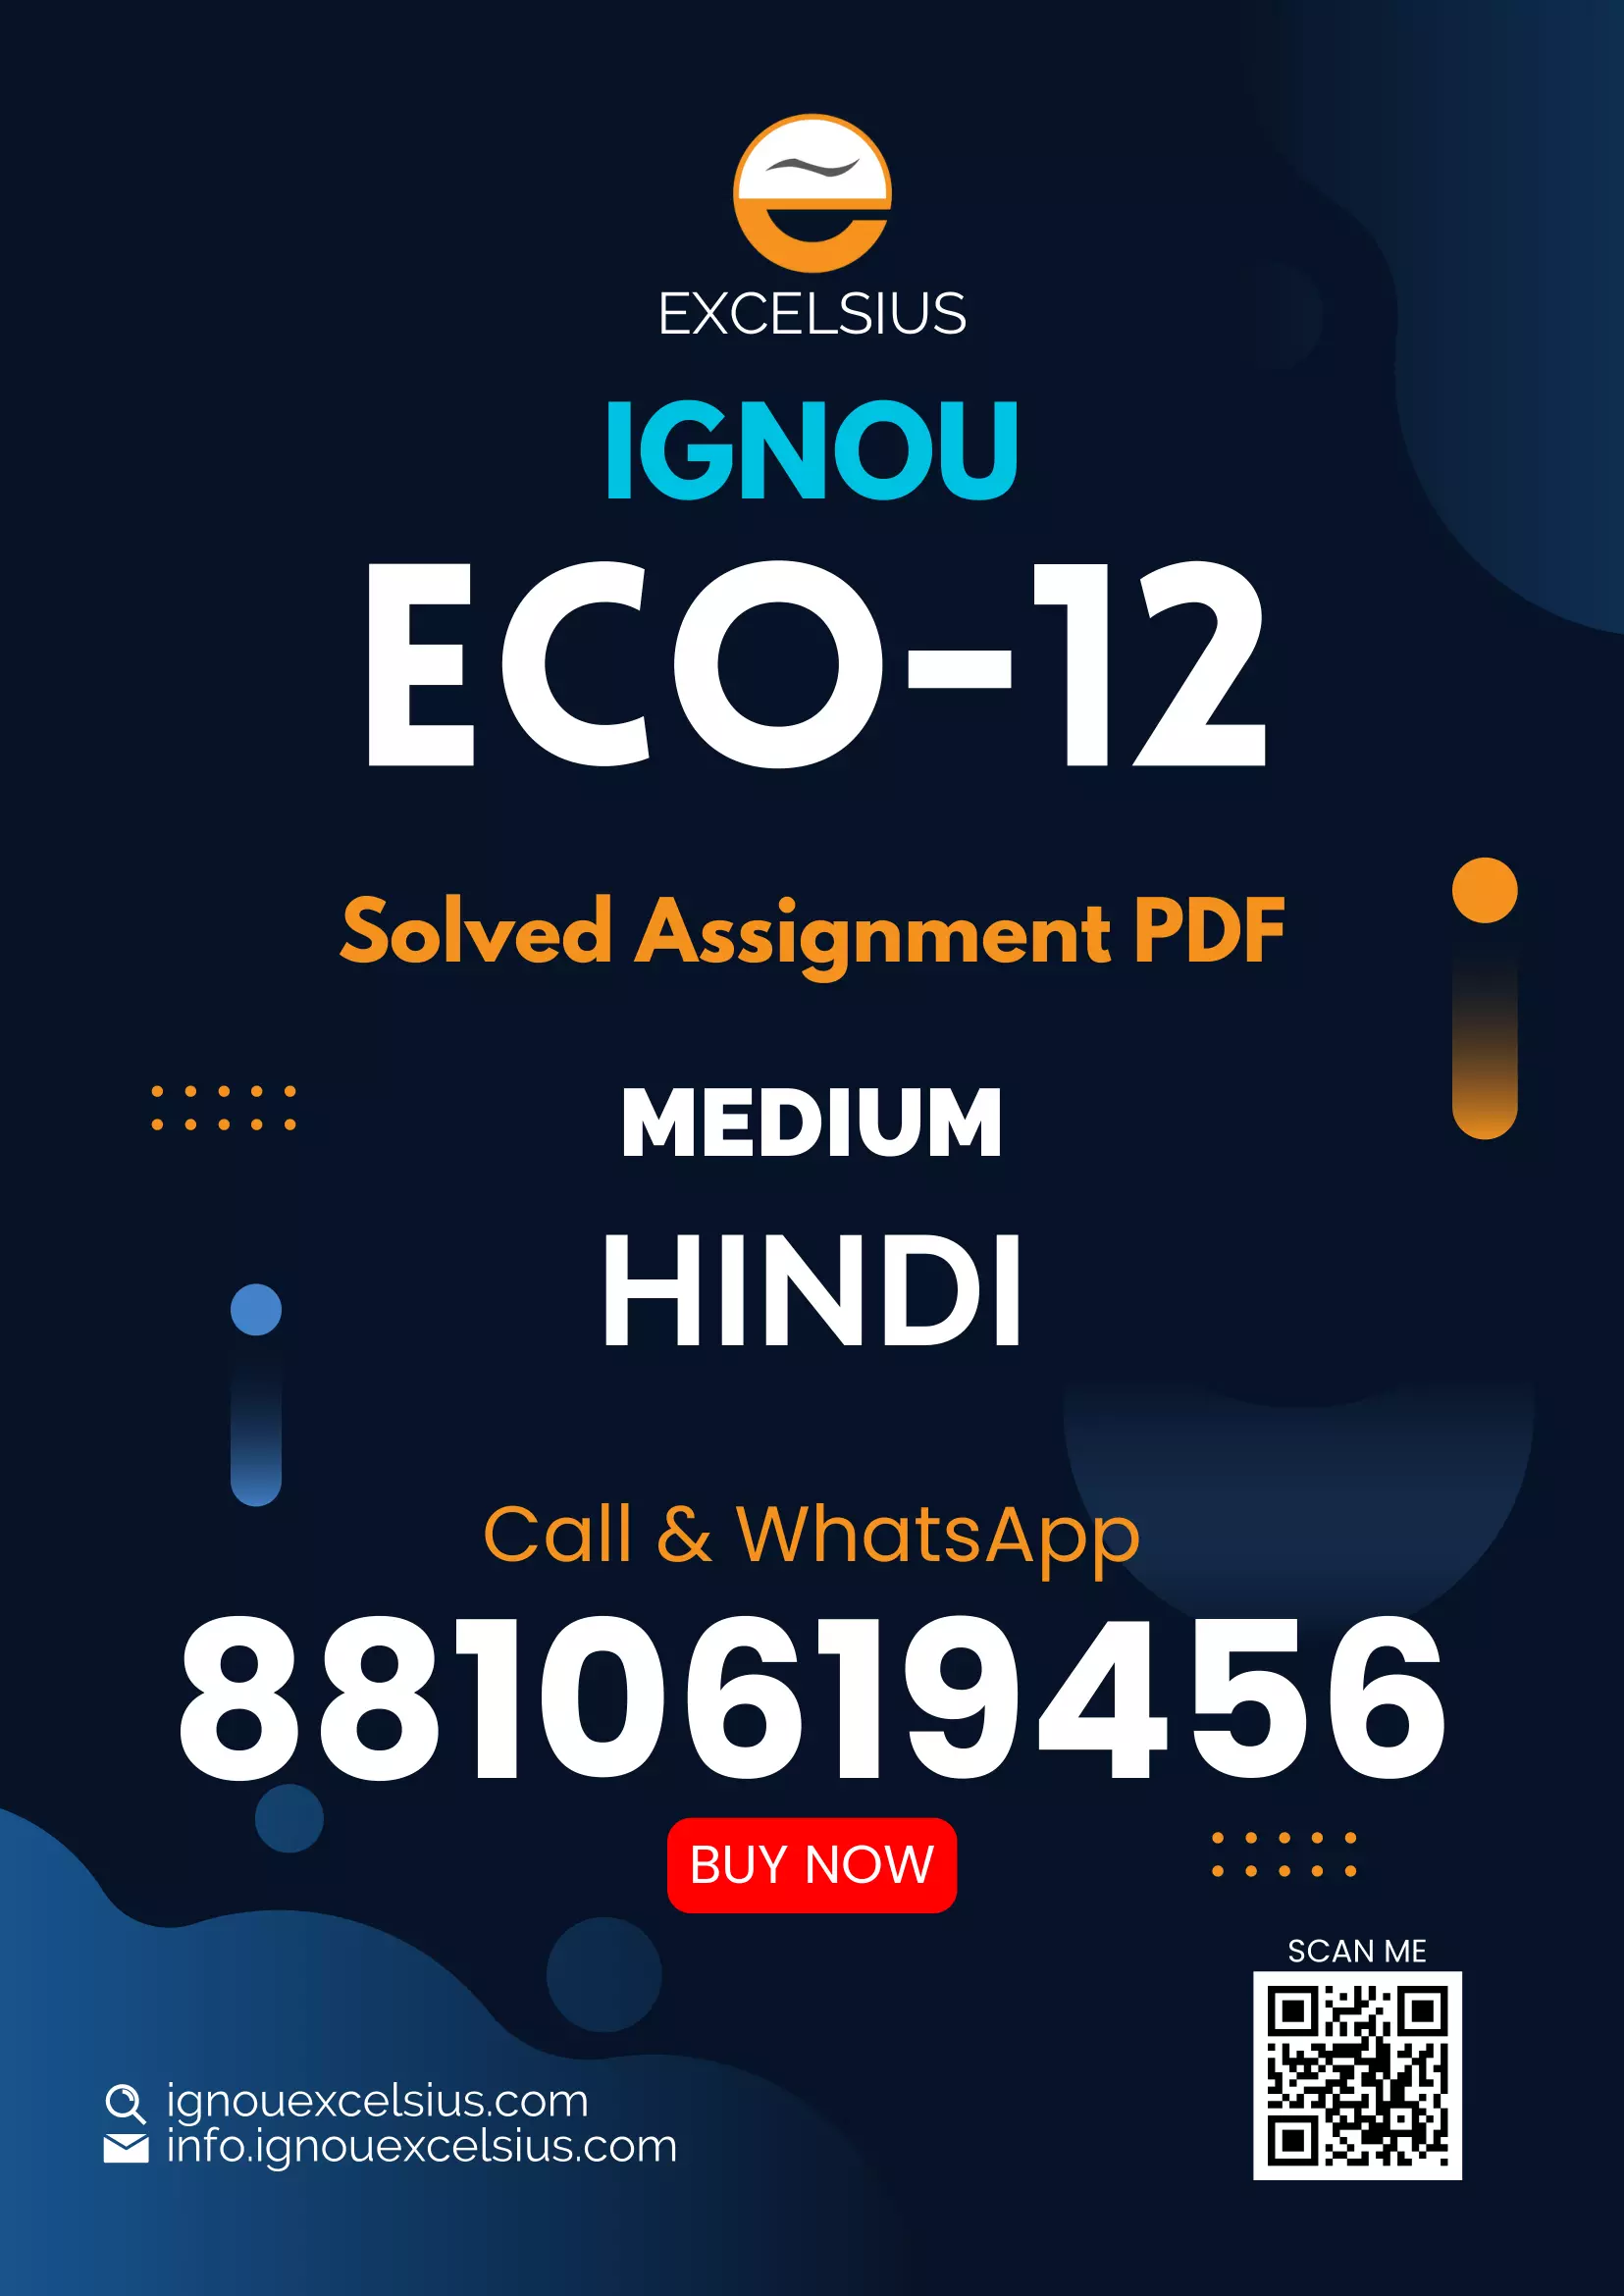 IGNOU ECO-12 - Elements of Auditing, Latest Solved Assignment-July 2022 – January 2023